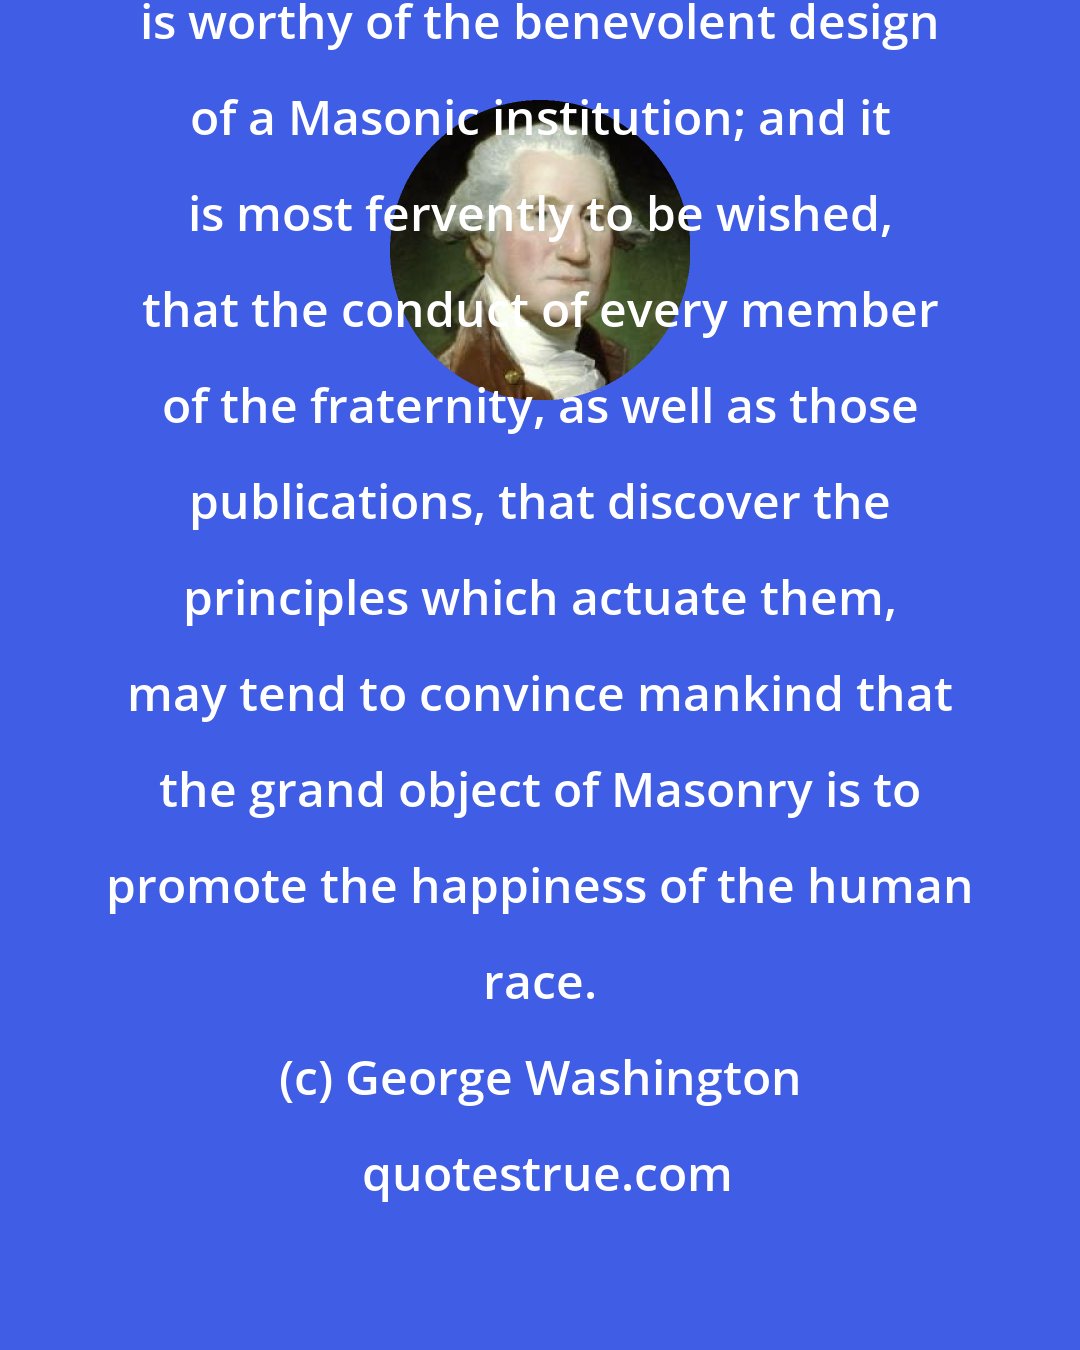 George Washington: To enlarge the sphere of social happiness is worthy of the benevolent design of a Masonic institution; and it is most fervently to be wished, that the conduct of every member of the fraternity, as well as those publications, that discover the principles which actuate them, may tend to convince mankind that the grand object of Masonry is to promote the happiness of the human race.